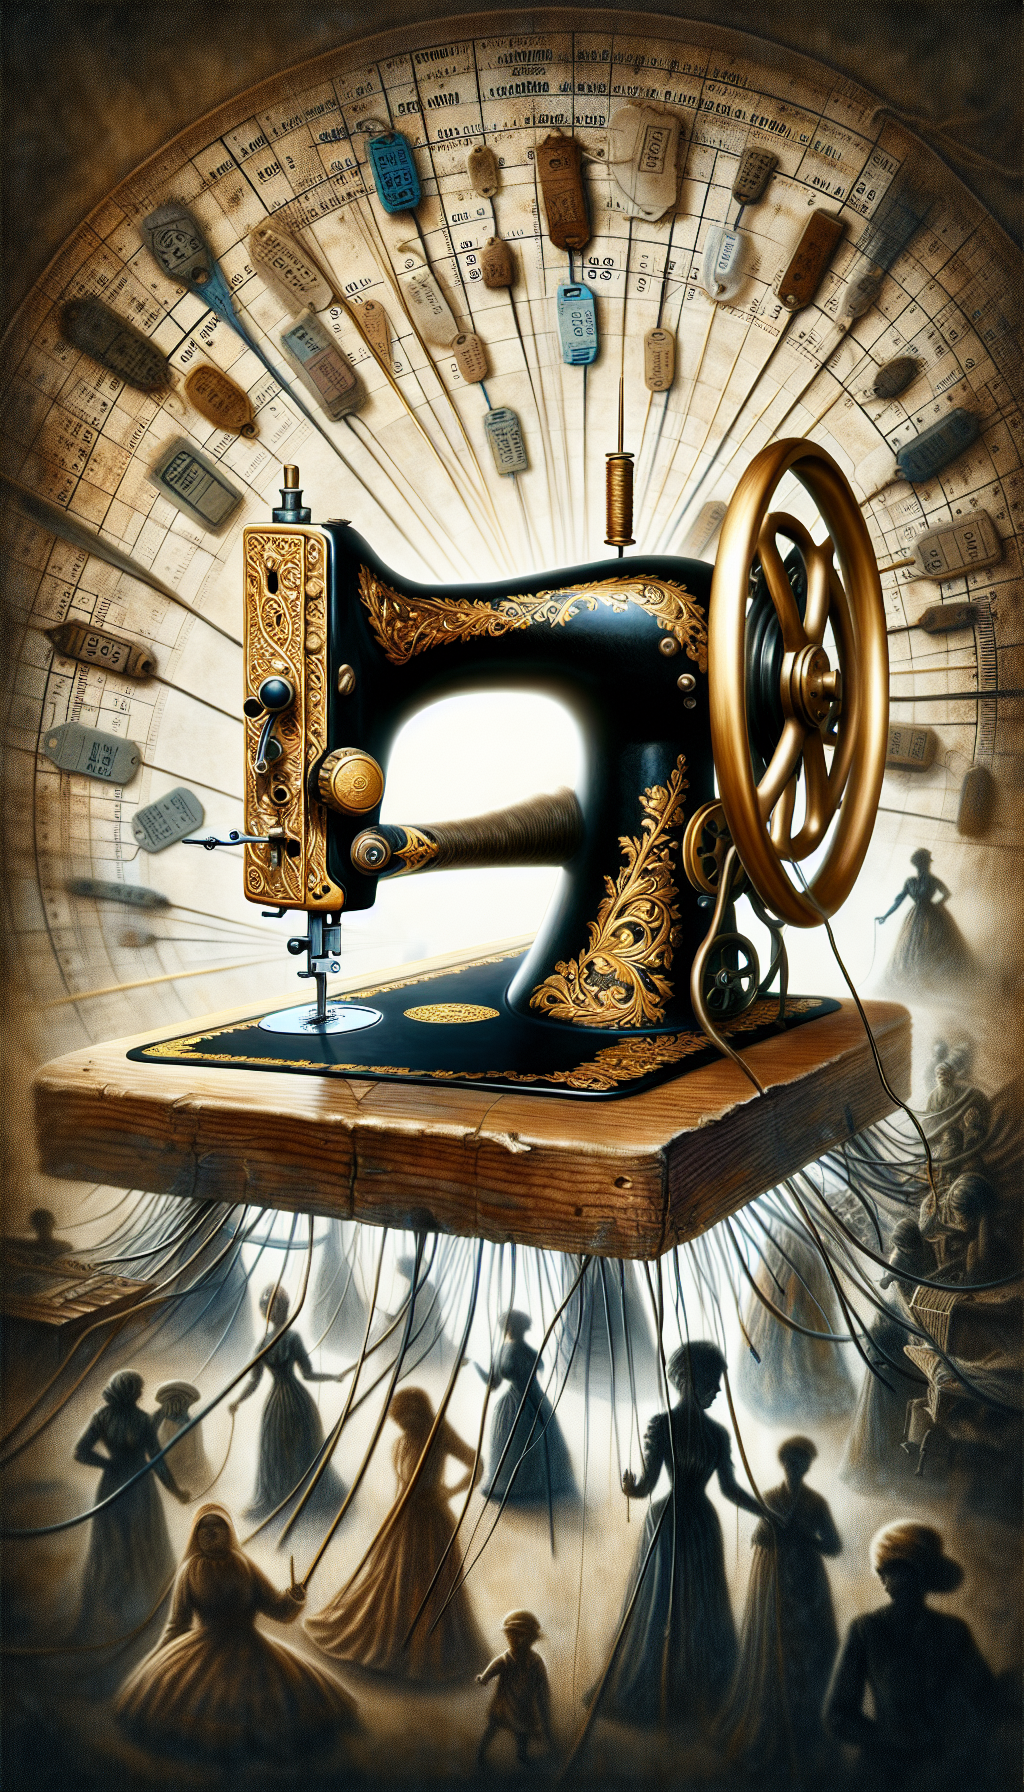 An ornate, vintage Singer sewing machine, with its gold filigree shimmering, serves as the centerpiece within a tapestry of history—seamlessly stitched timelines branching from its needle. Beneath, a shimmering price tag pendulum swings, suggesting fluctuating antique values, while shadowy figures of seamstresses from bygone eras faintly embroider garments that shape the fabric of time.